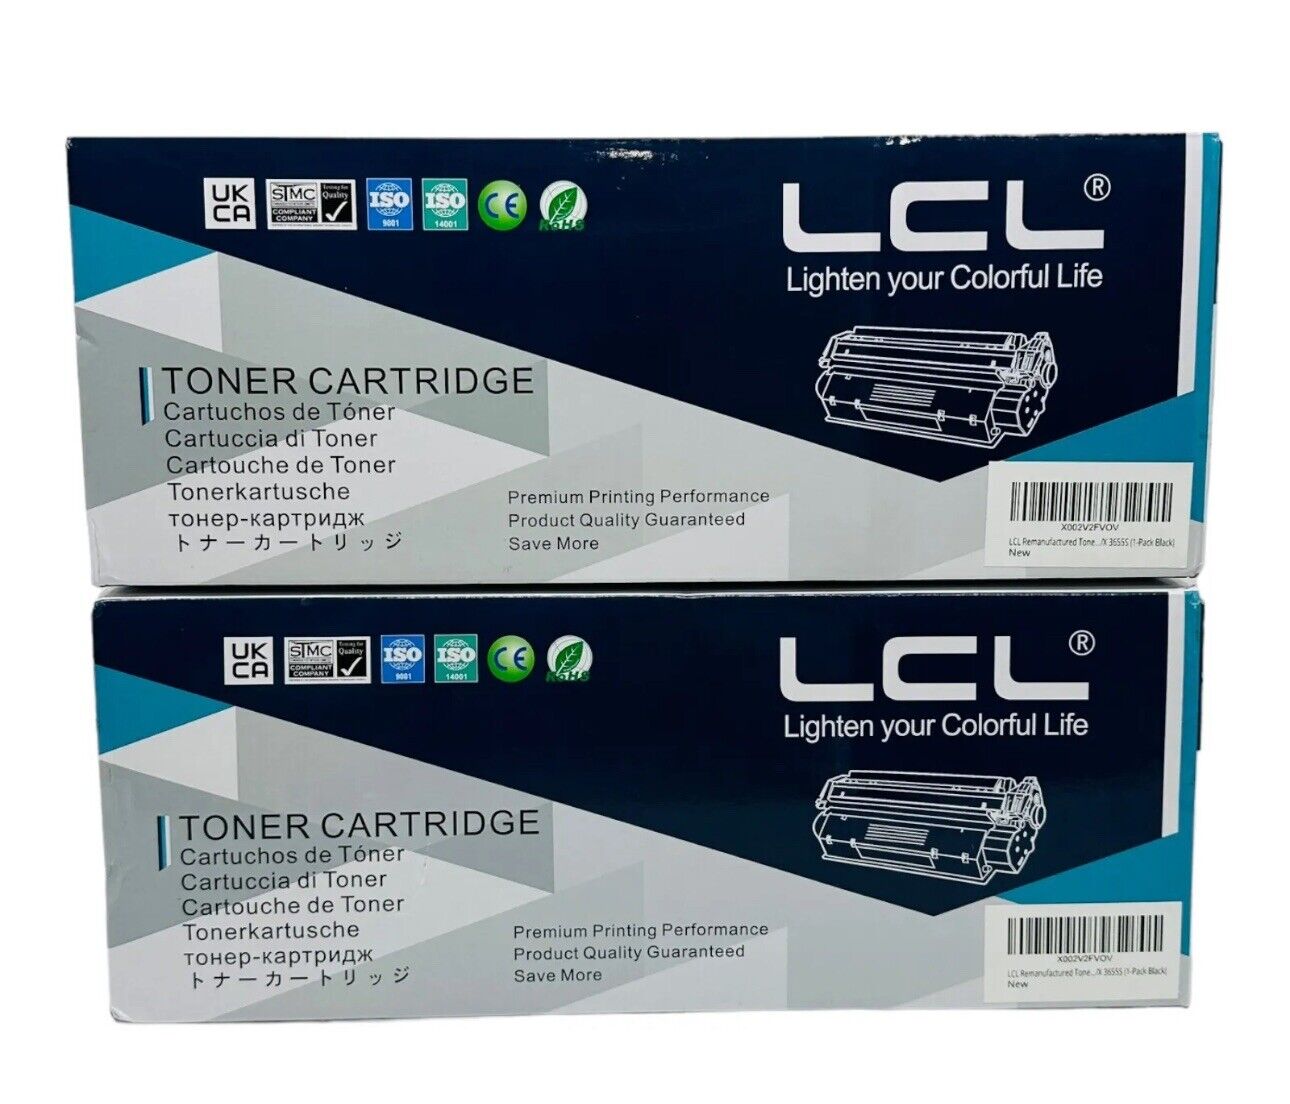 2x LCL Toner CartridgeReplacement for Xerox 106R02736, 106R02738